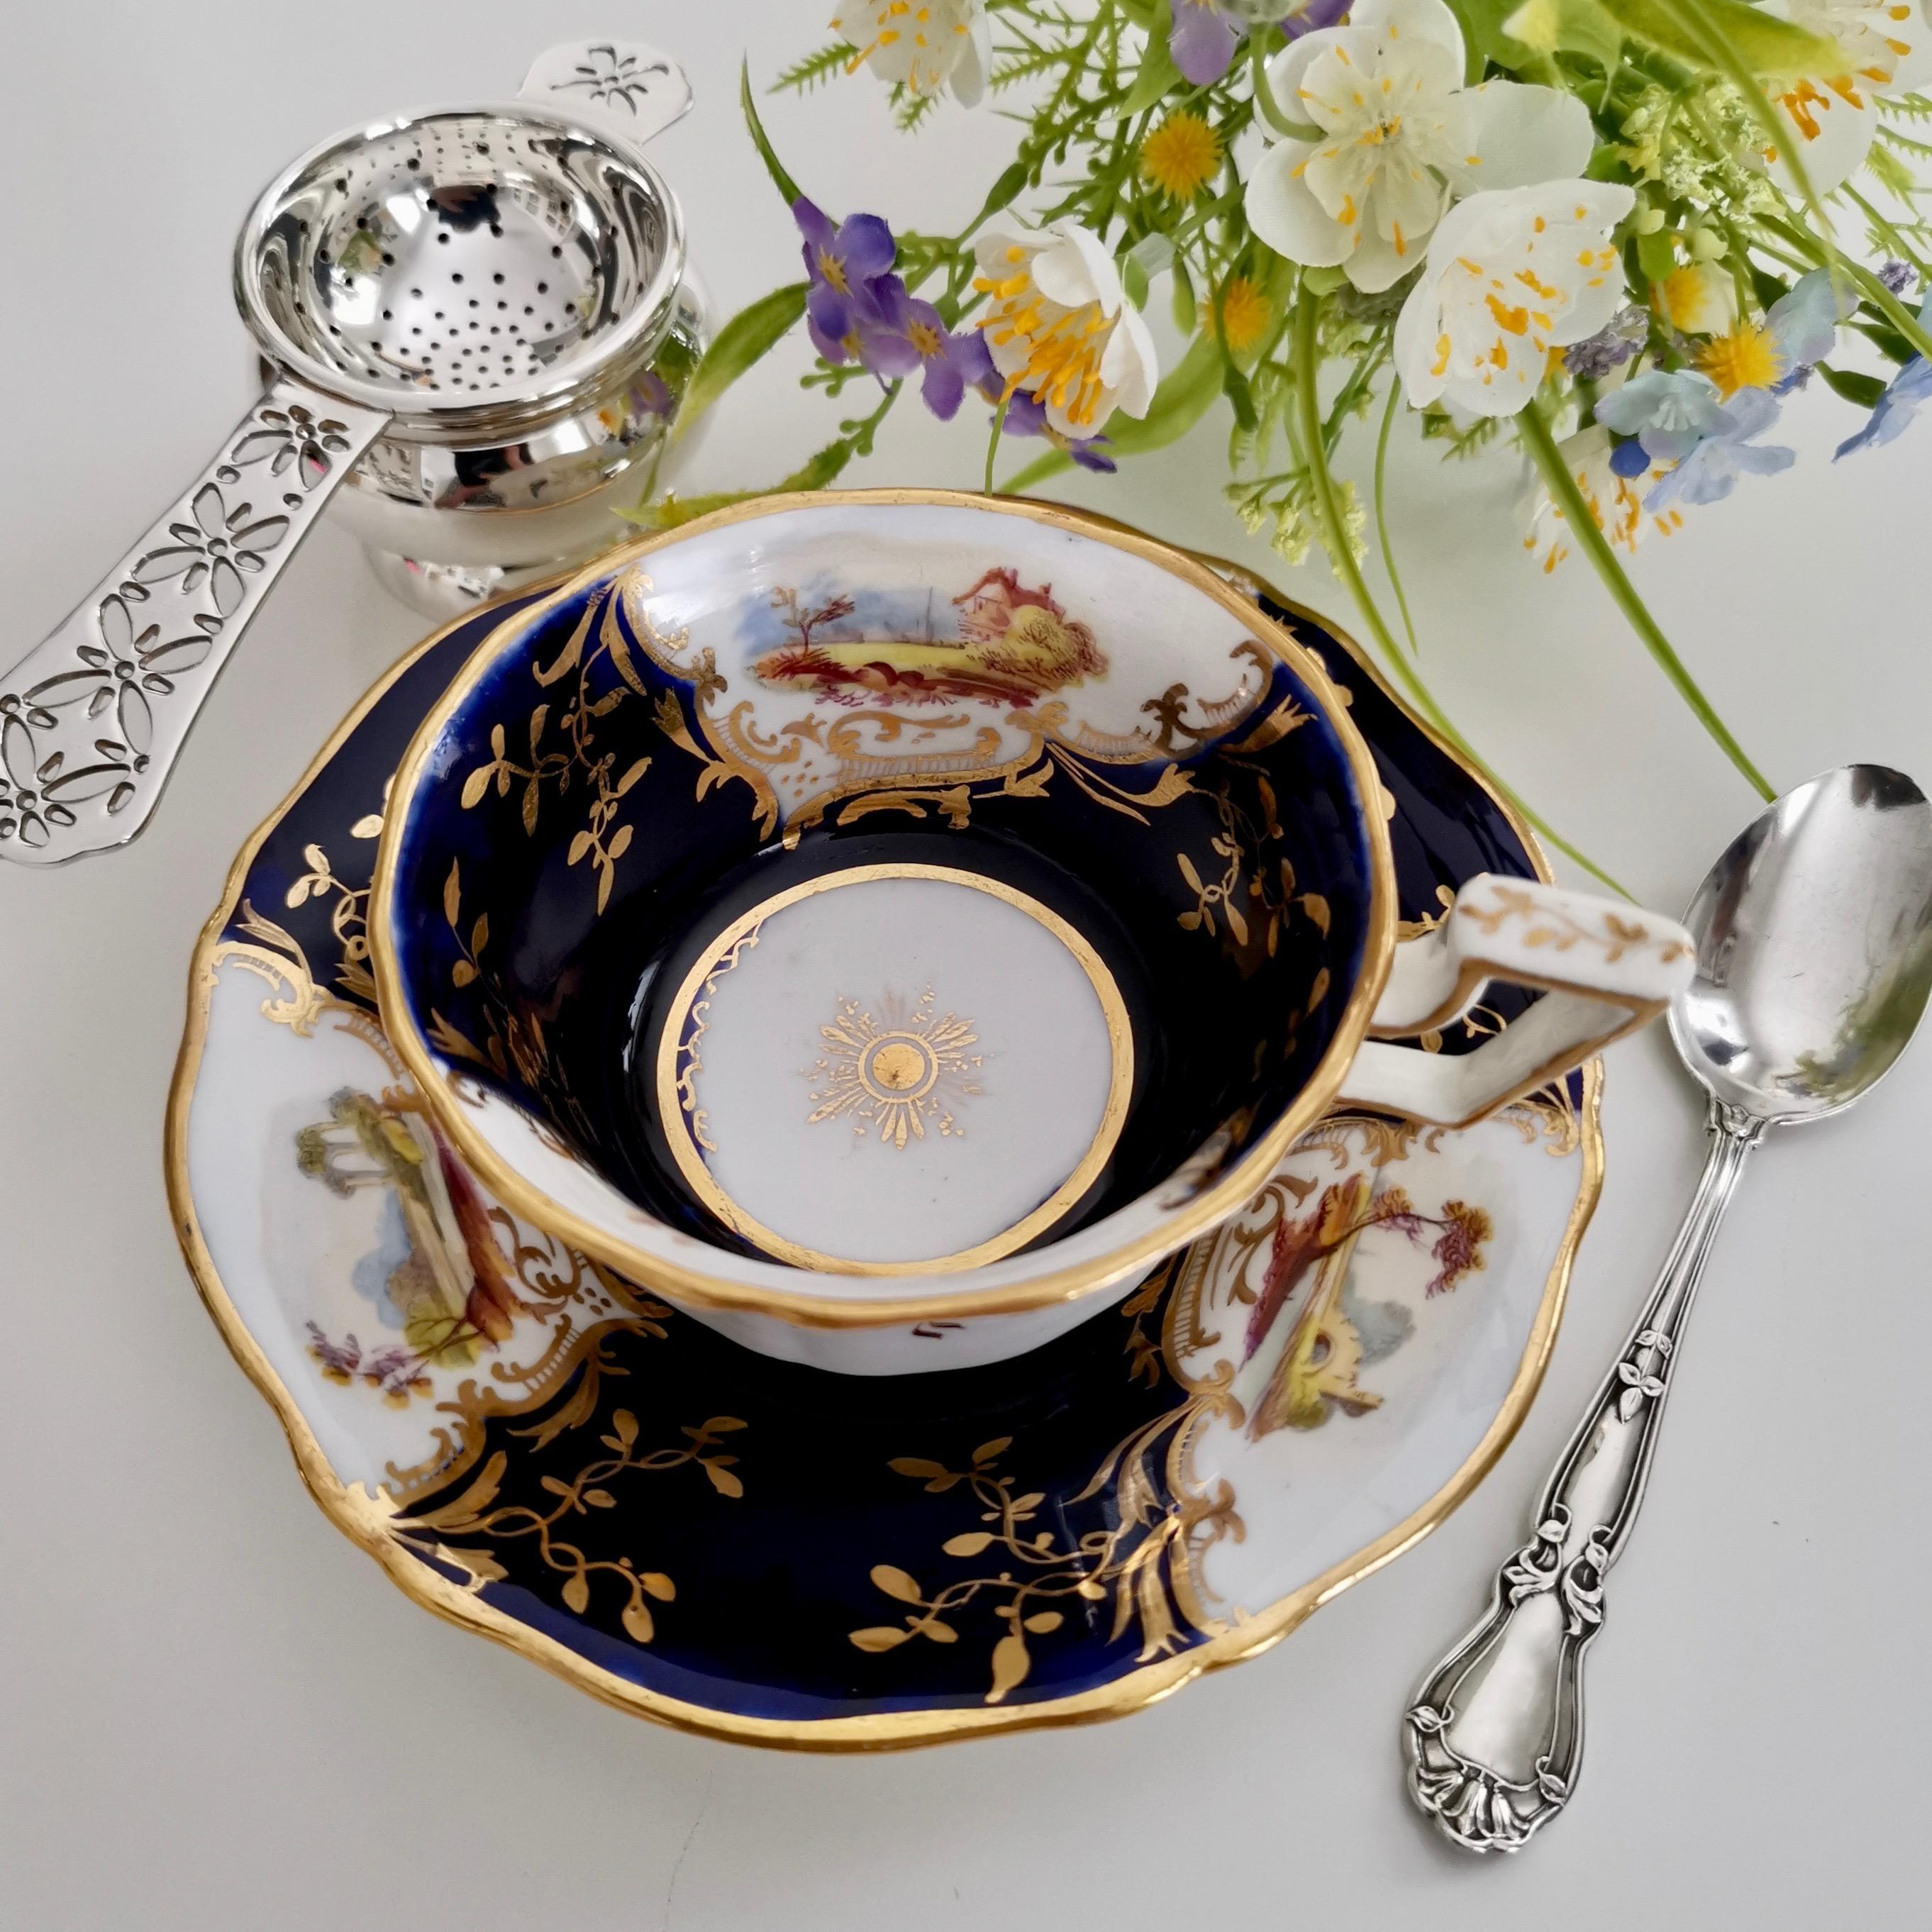 This is a beautiful teacup and saucer made by Coalport in circa 1823, which is known as the Regency period. The set is made in the famous fluted shape with an 